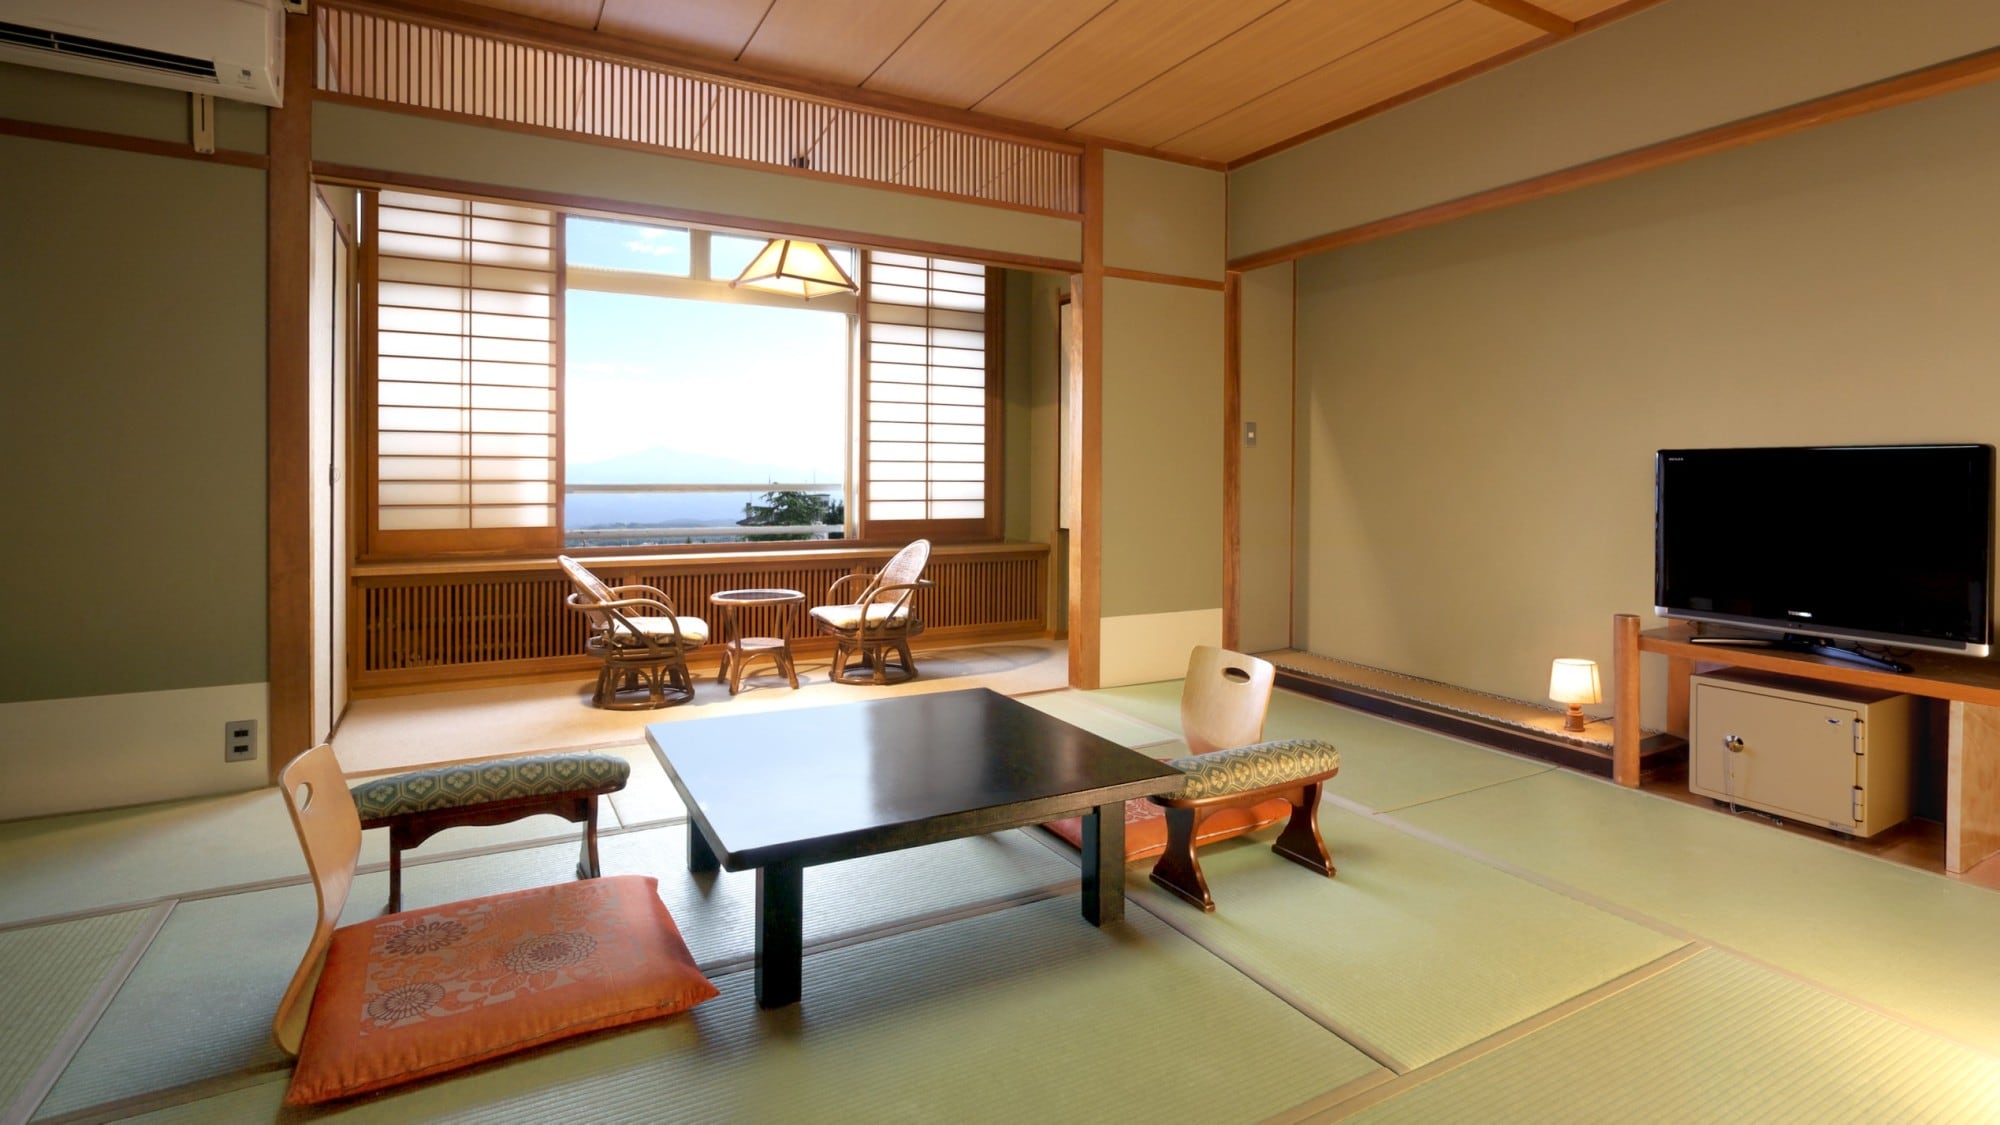 Japanese-style room 10 to 12 tatami mats